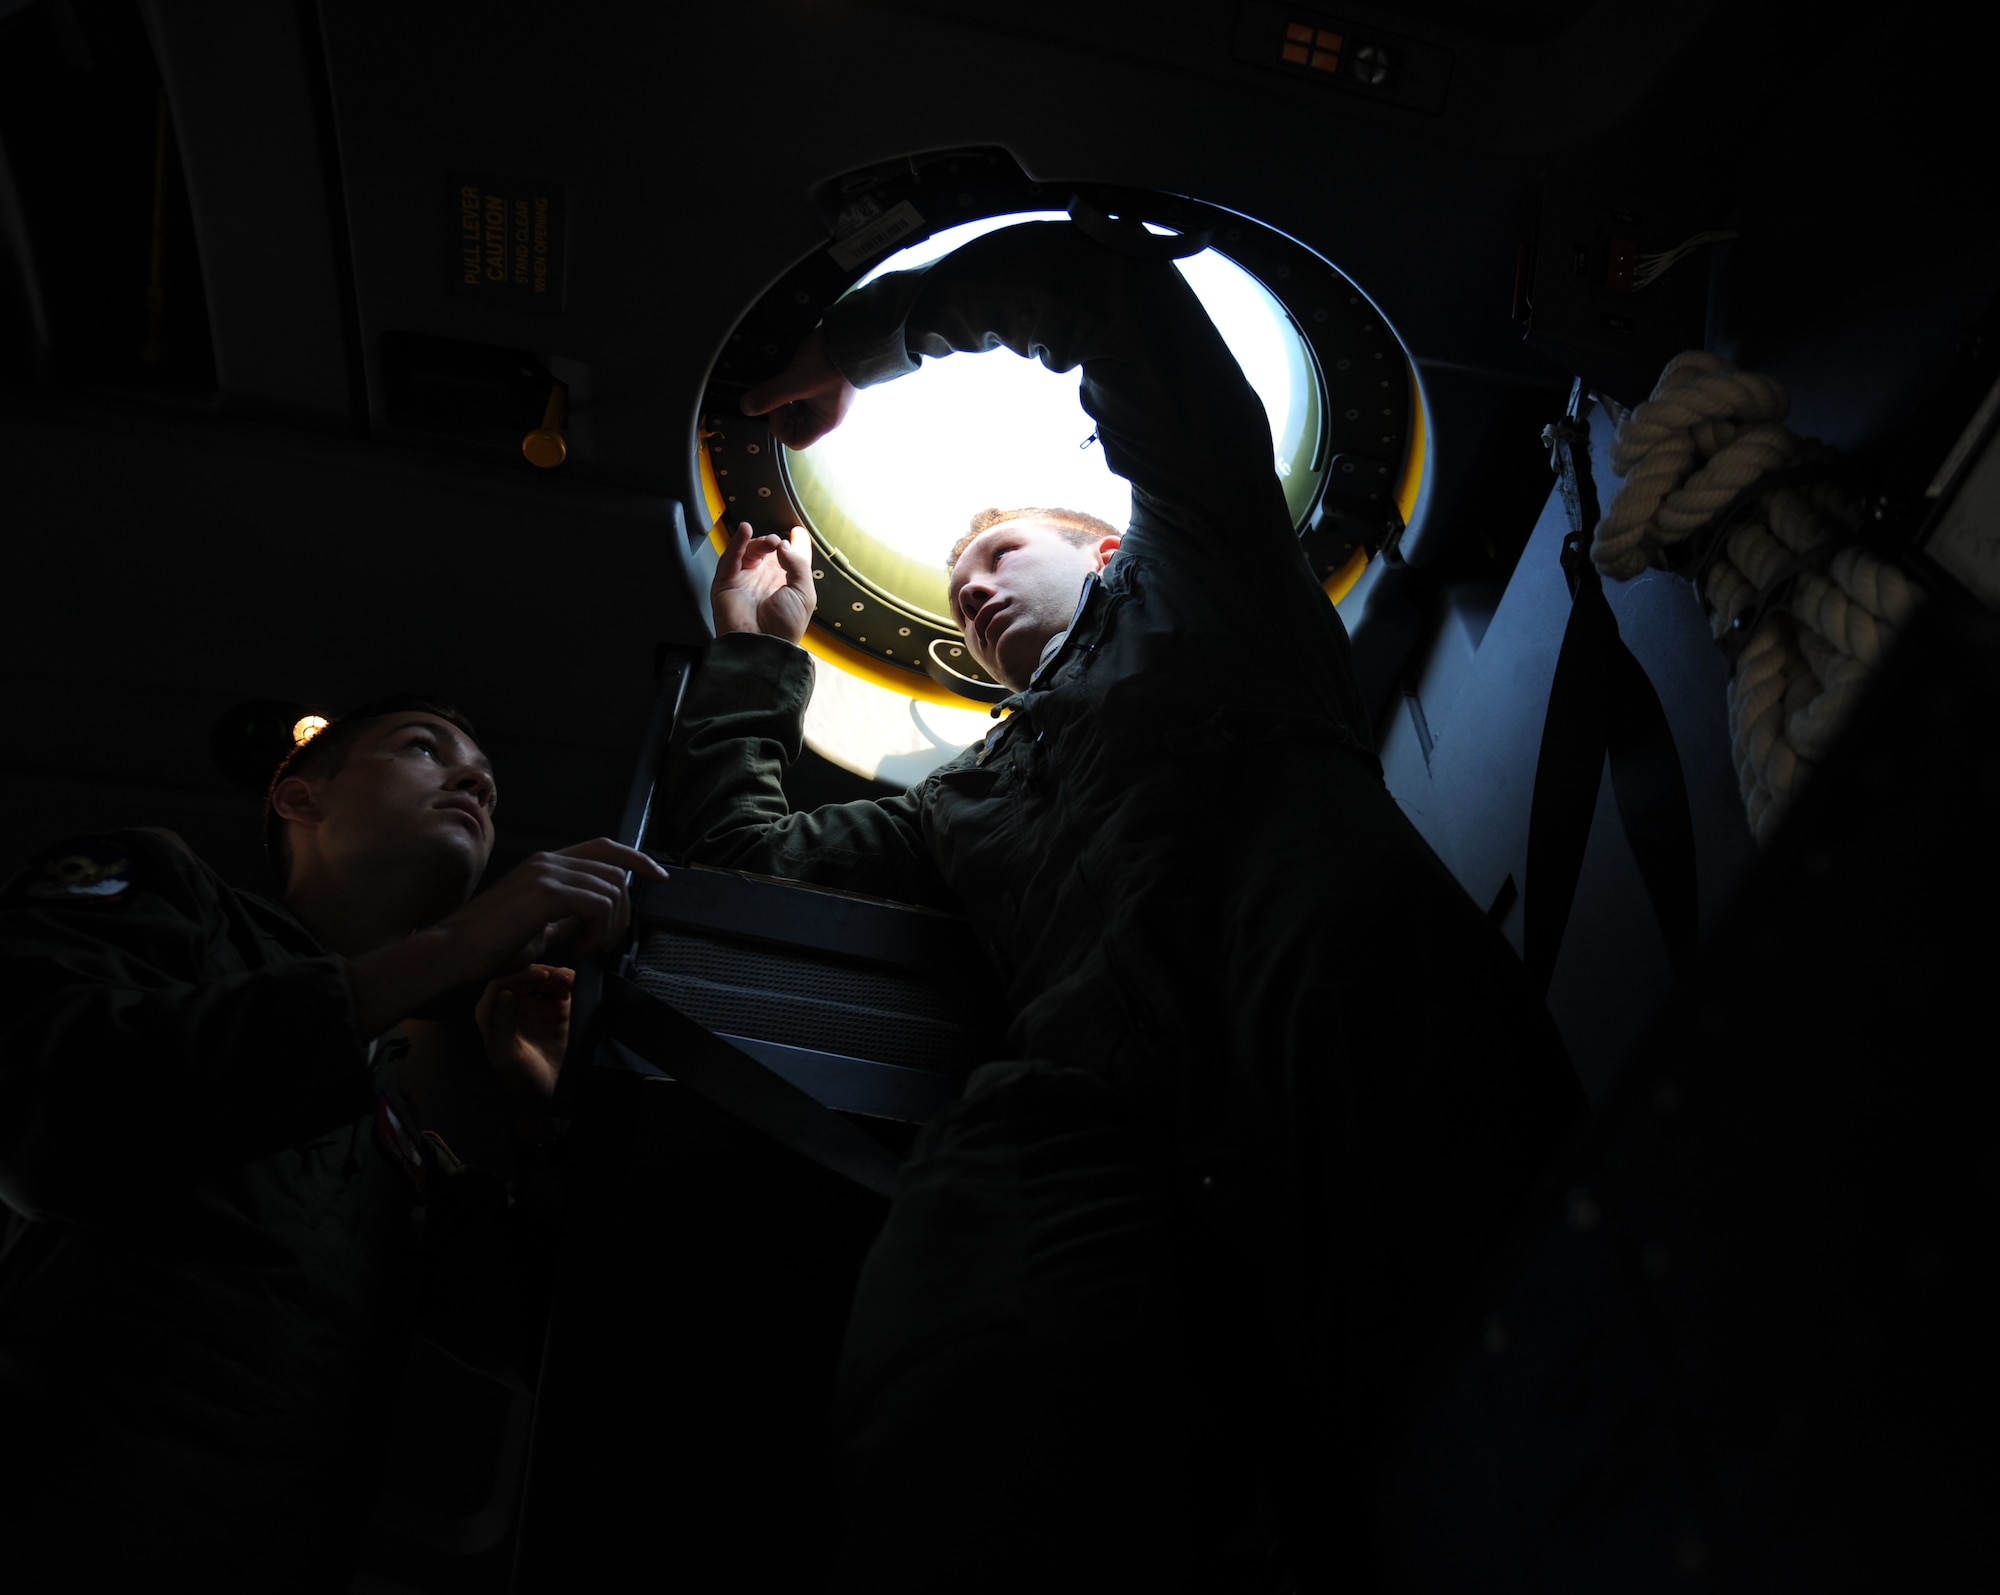 U.S. Air Force Capt. Tyler Comte, 39th Airlift Squadron co-pilot, looks on as Airman 1st Class Jacob Betts, 40th Airlift Squadron loadmaster, installs a window in the ceiling of a C-130J Super Hercules July 23, 2014, at Dyess Air Force Base, Texas. During a training exercise, Betts used the bubble-shaped window to watch an F-16 Fighting Falcon and relay information over a headset to his fellow crewmembers. (U.S. Air Force photo by Airman 1st Class Kedesha Pennant/Released)